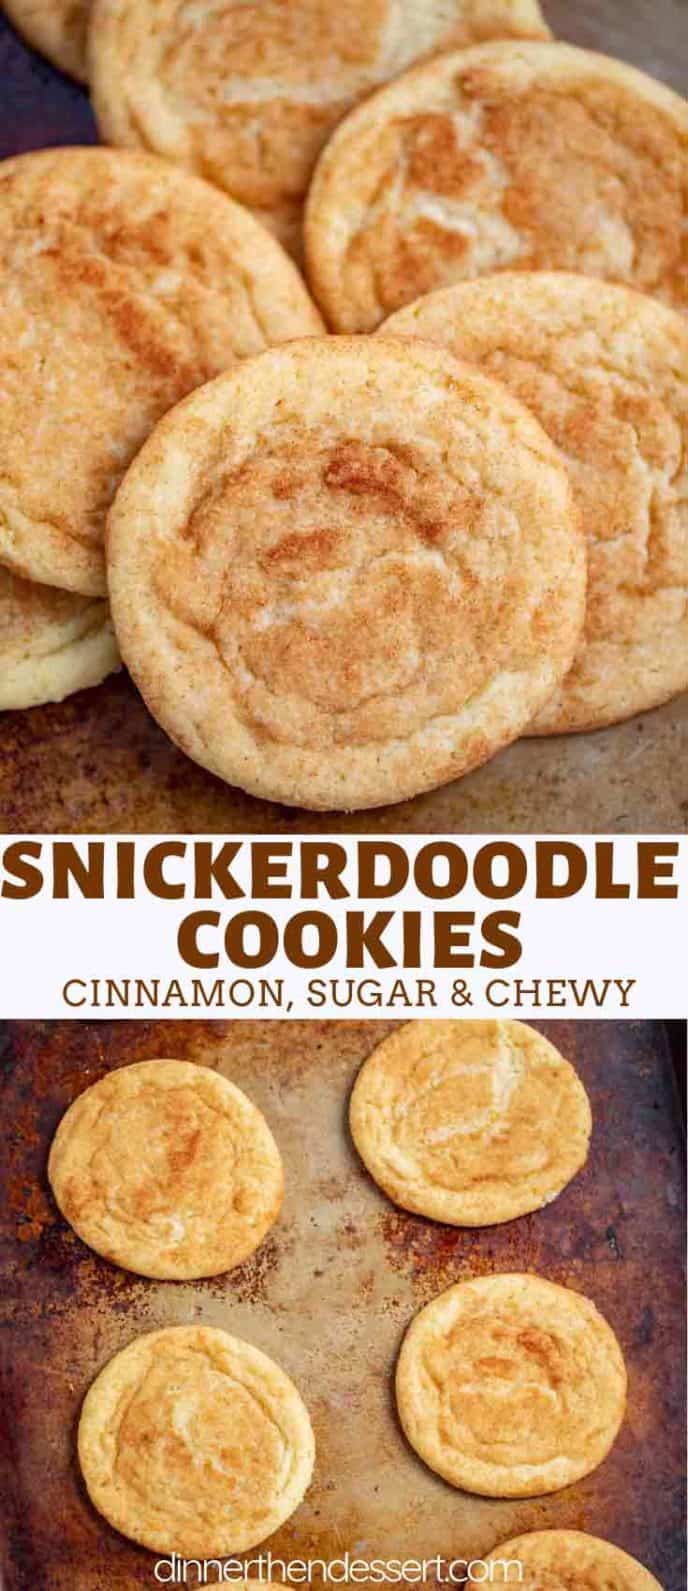 Collage of Snickerdoodle Cookie Photos